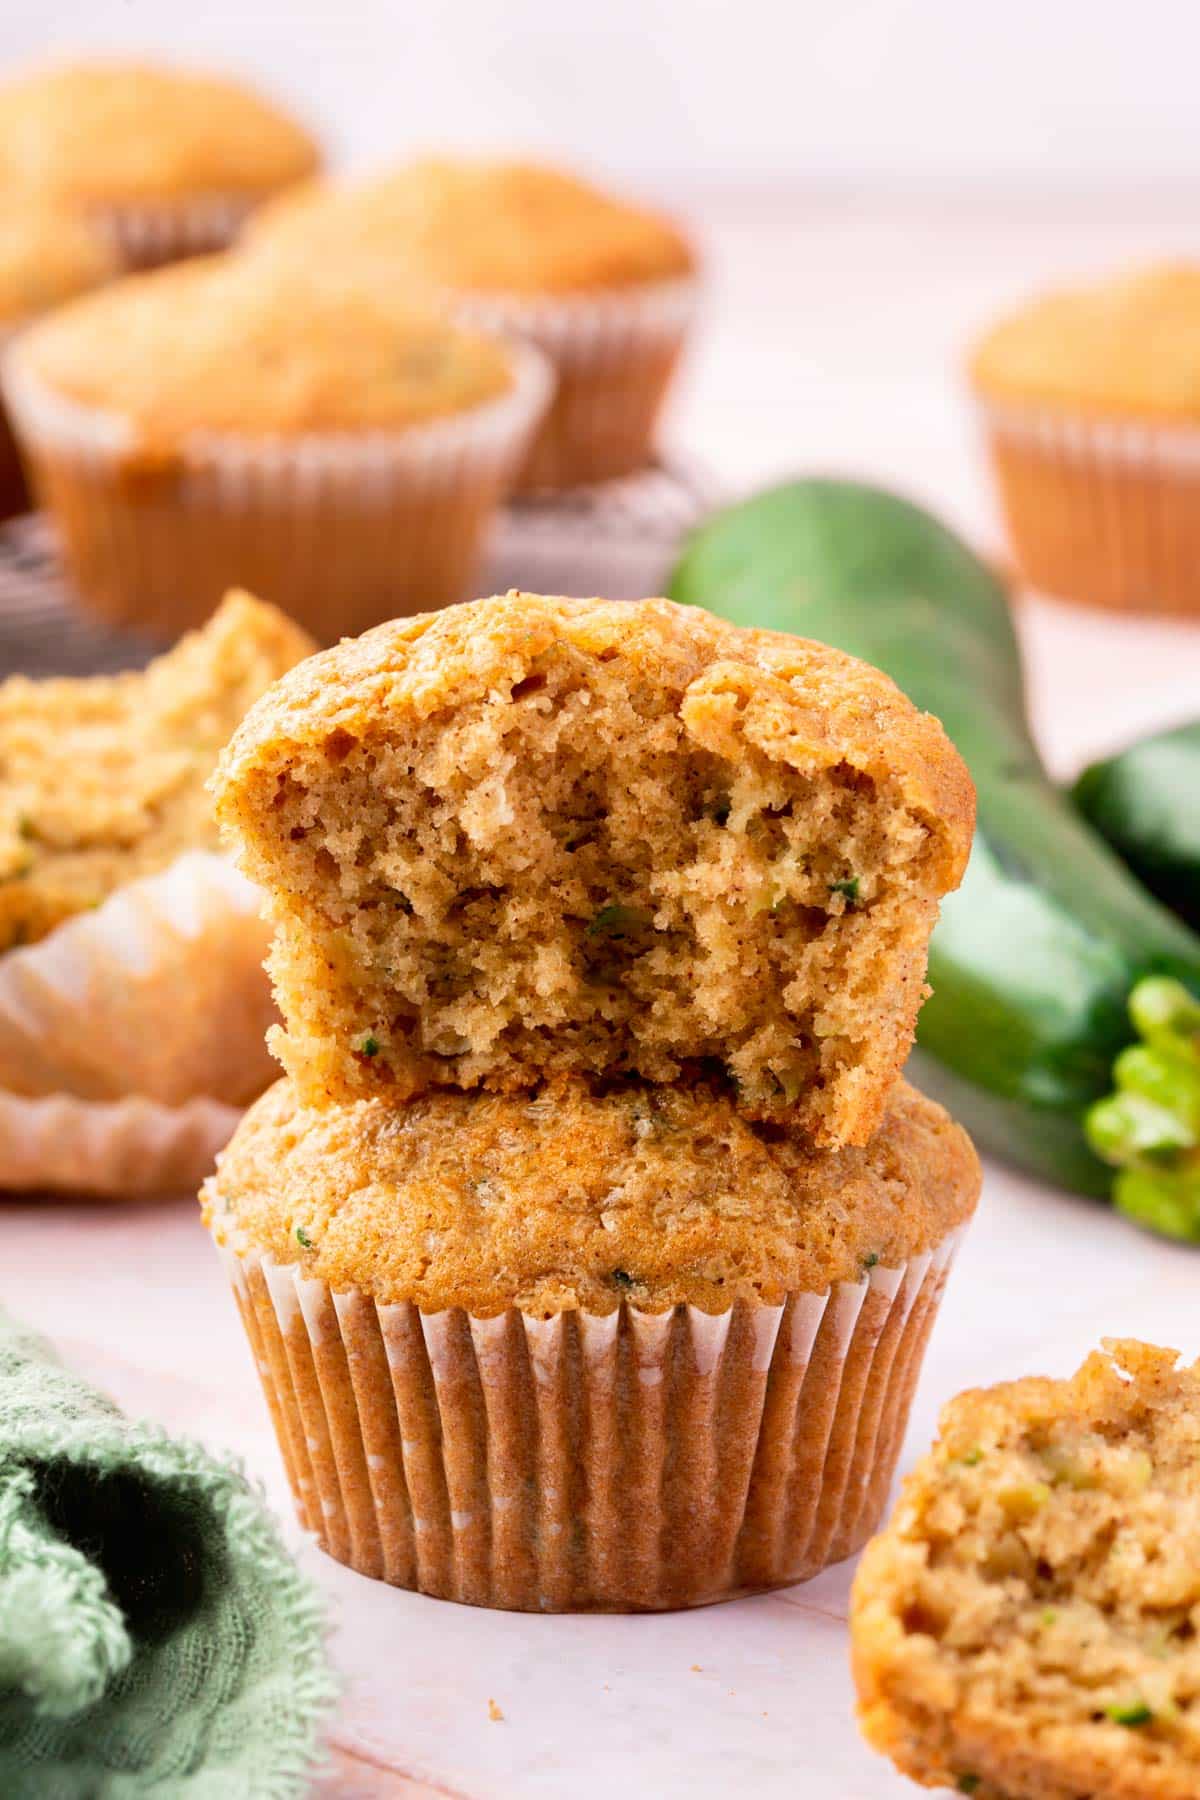 A gluten-free zucchini muffin with a bite taken out of it stacked on top of another zucchini muffin.